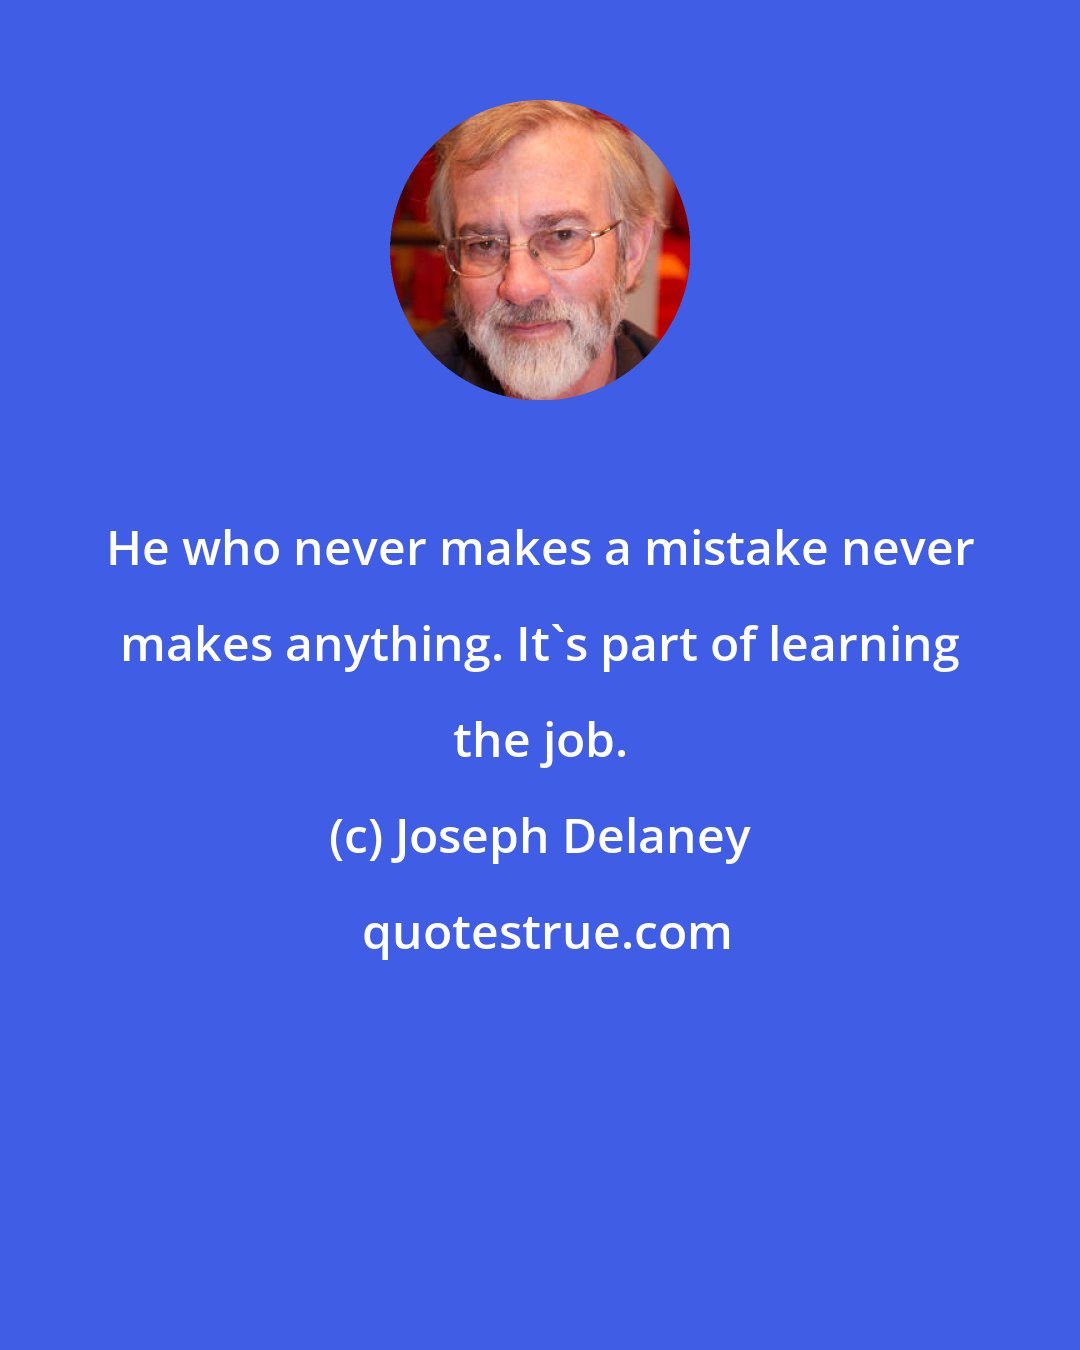 Joseph Delaney: He who never makes a mistake never makes anything. It's part of learning the job.